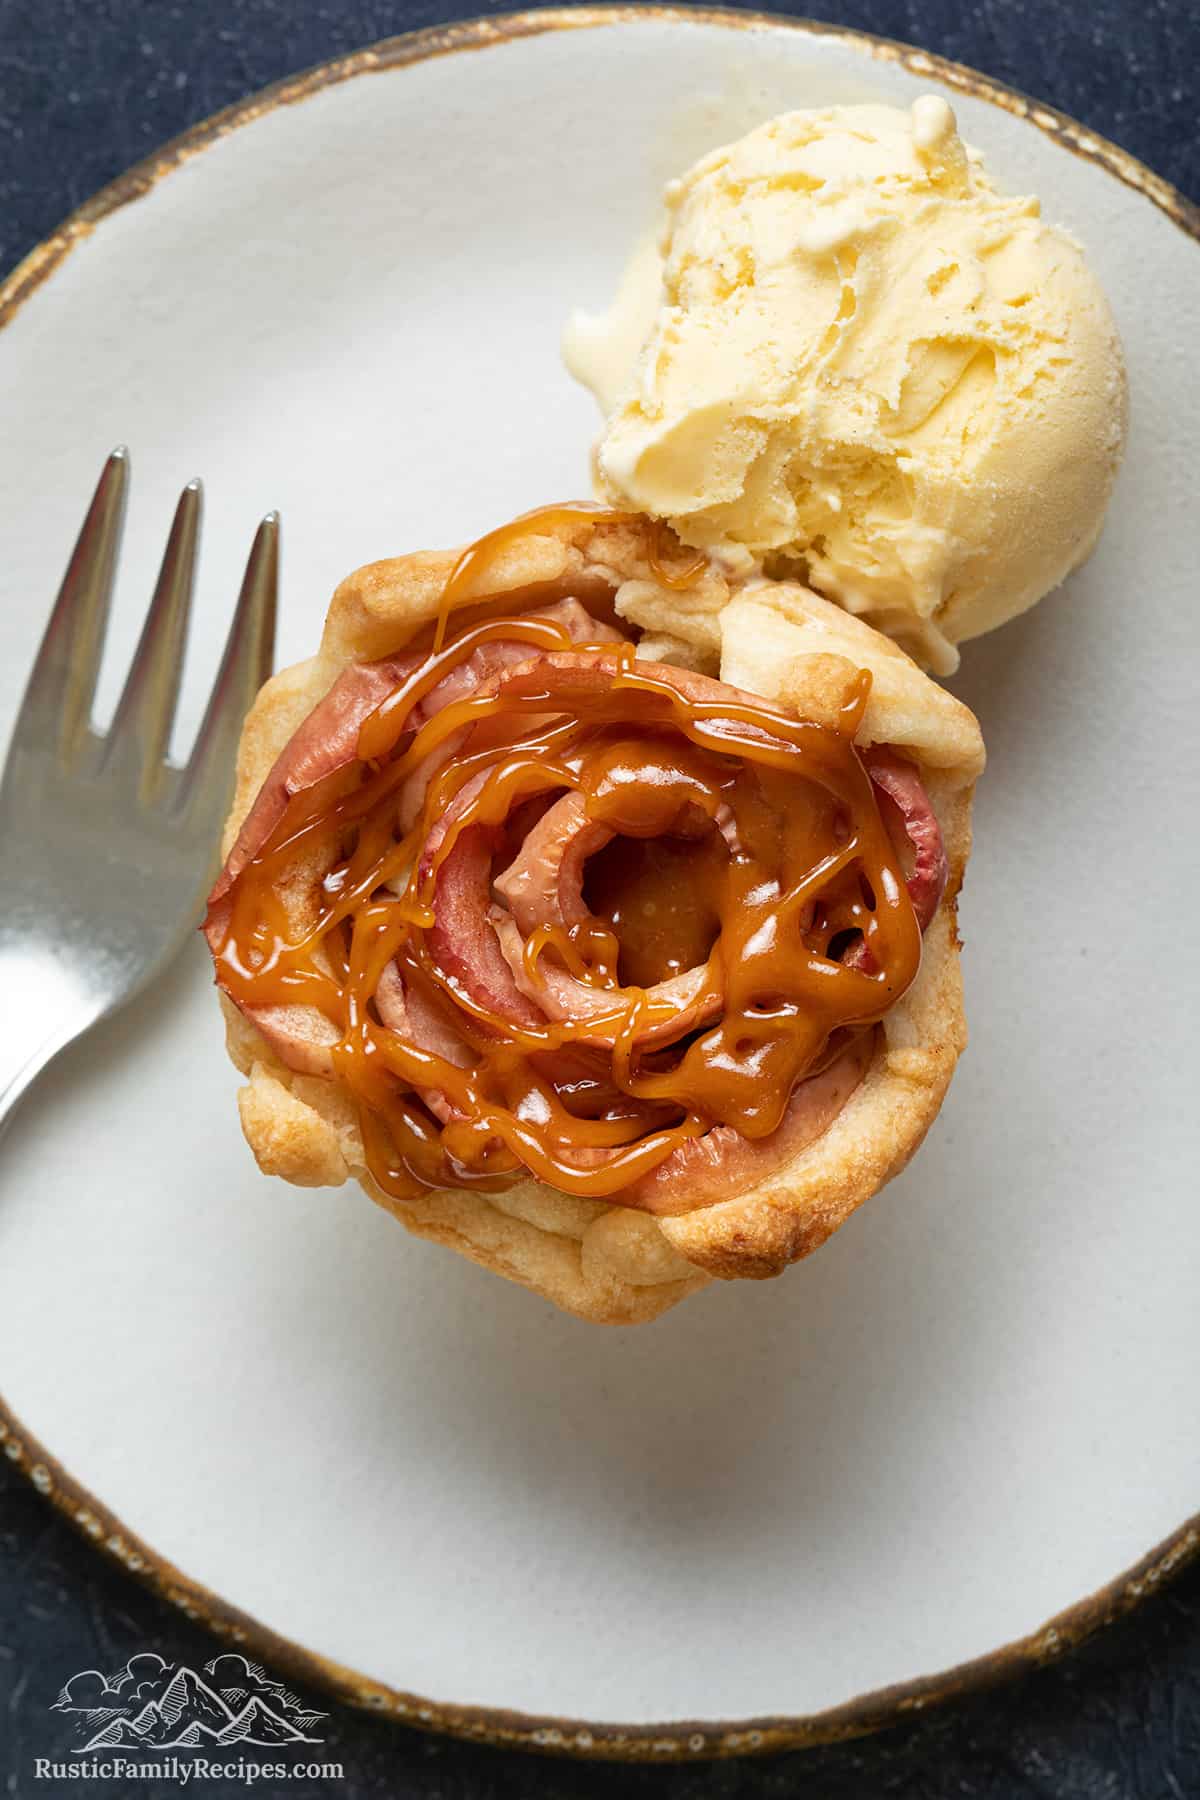 Top view of an Apple Rose Tartlet with ice cream